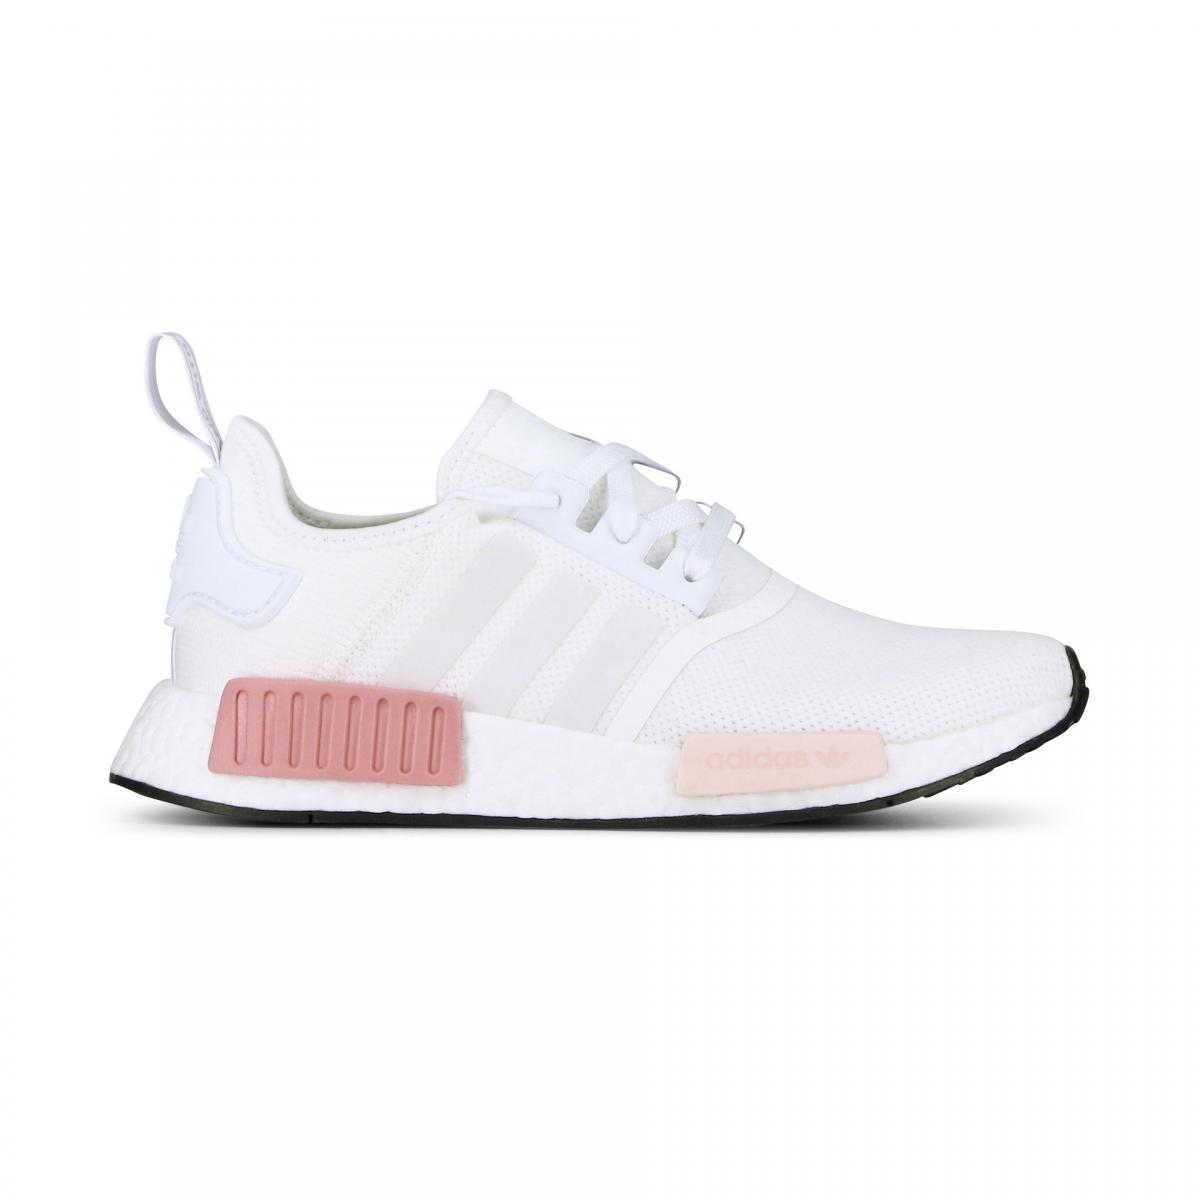 adidas nmd blanche et rose